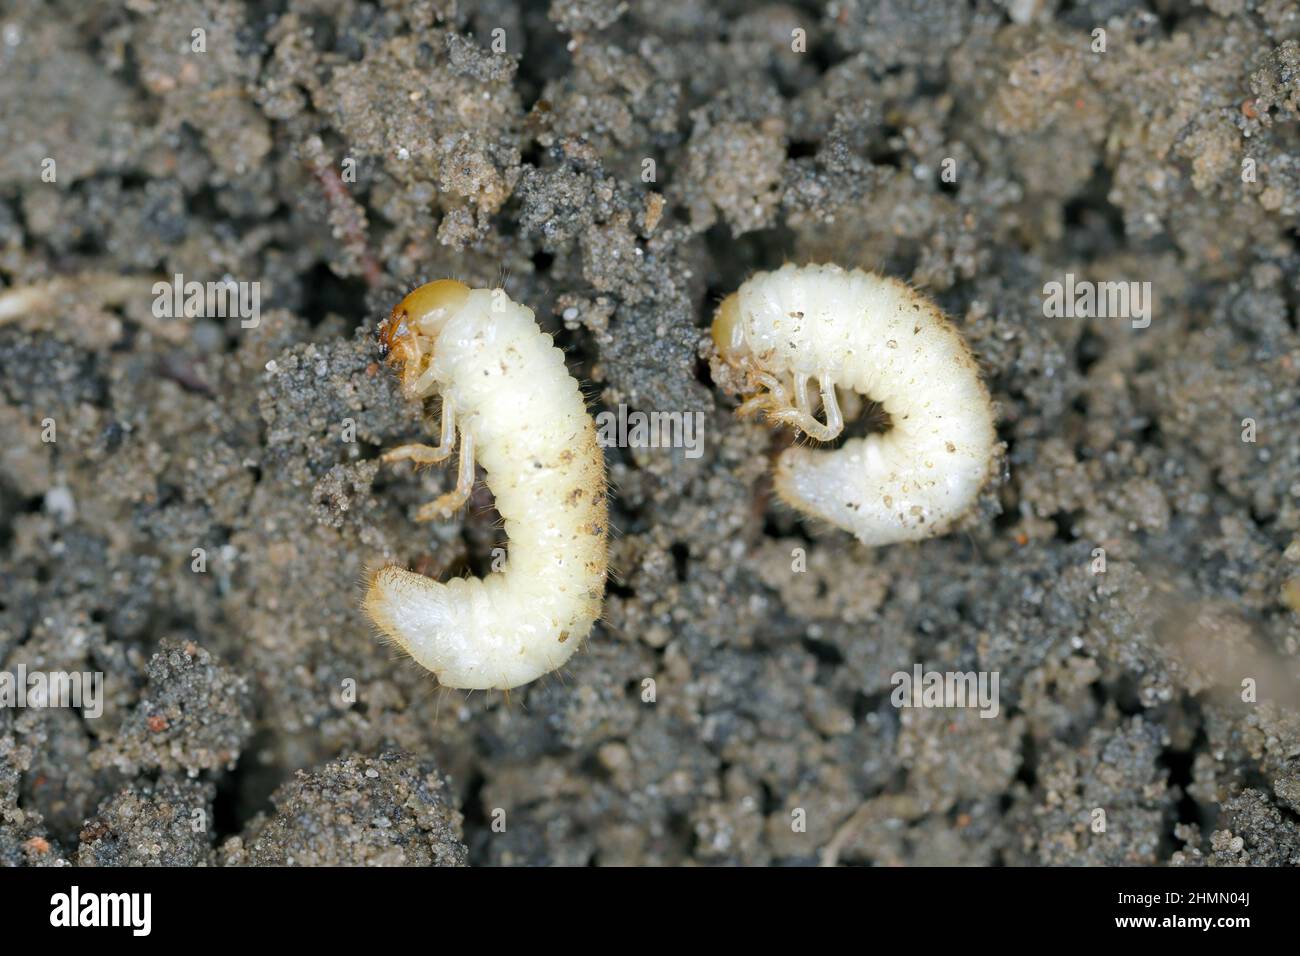 The larvae of the May beetle Common Cockchafer or May Bug (Melolontha melolontha). Grubs are important pest of plants. Stock Photo